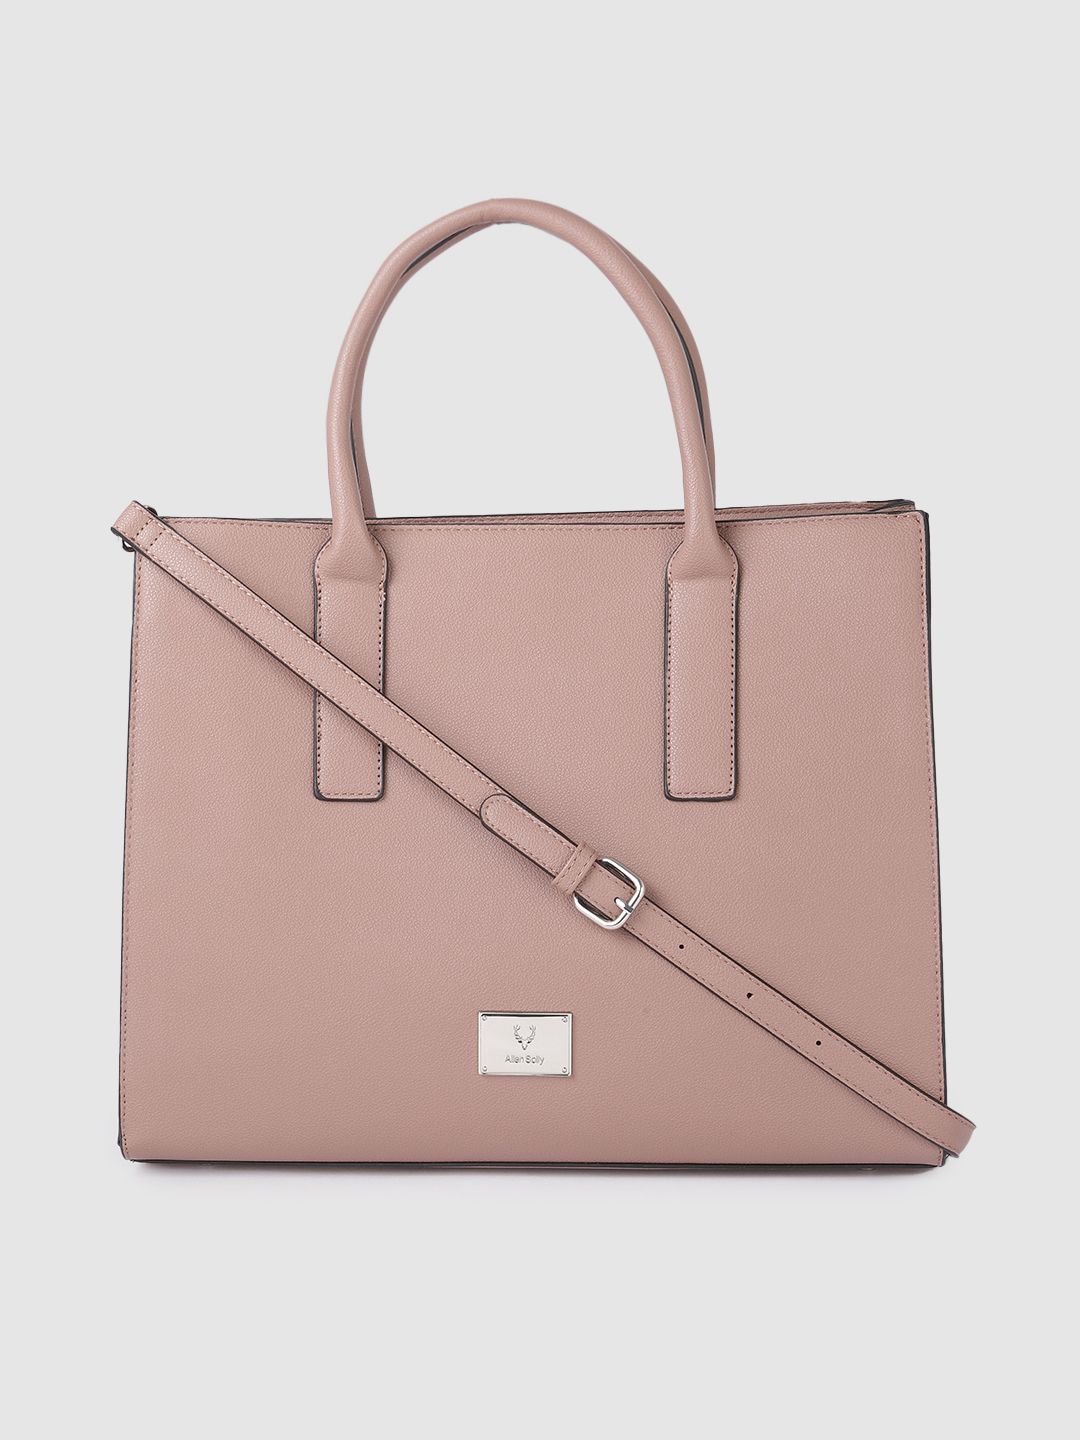 Allen Solly Pink PU Structured Handheld Bag Price in India